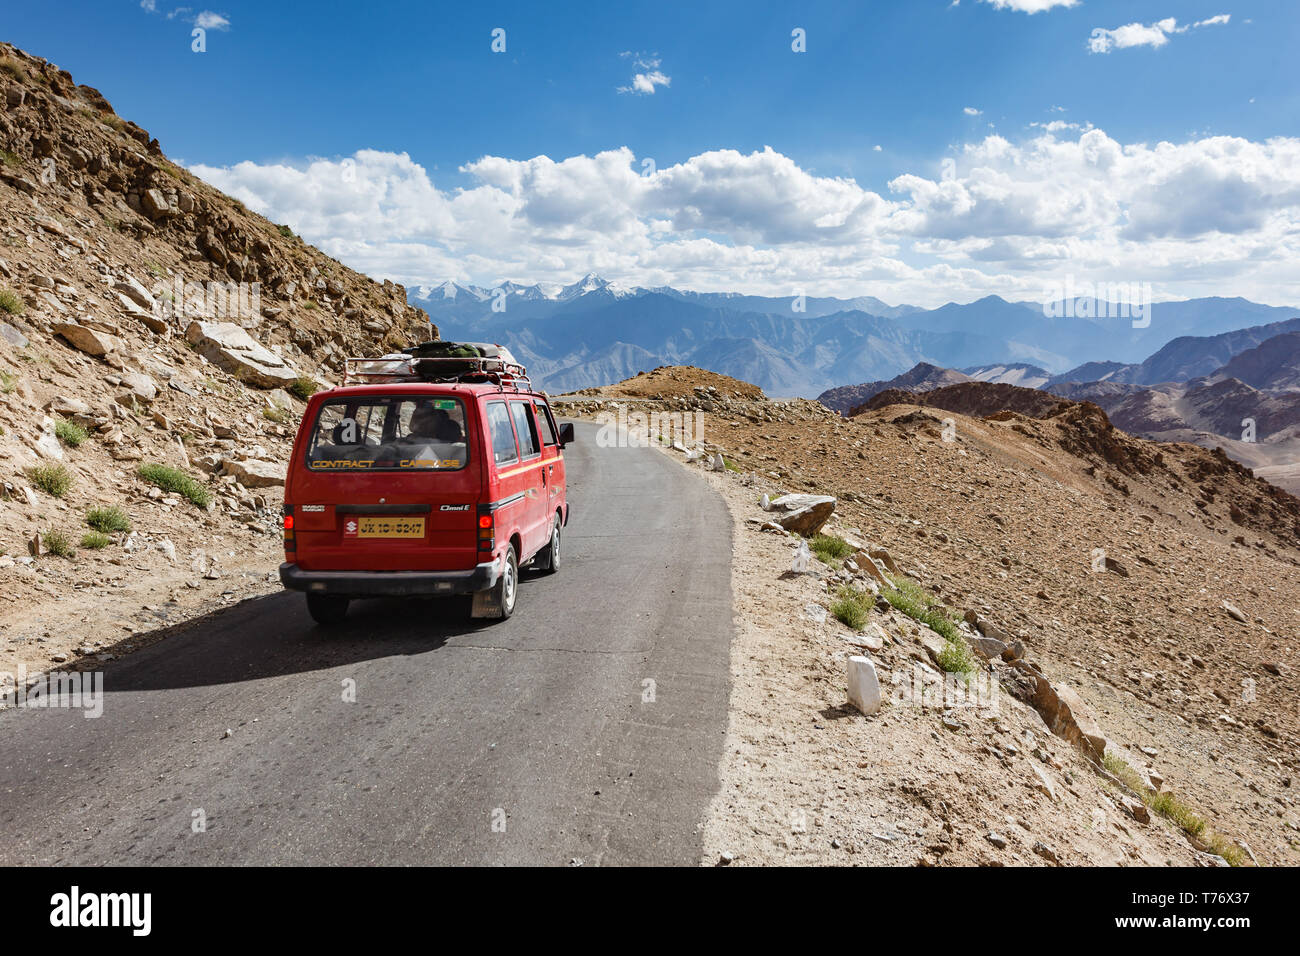 View of high mountain pass road  in Kashmir with support vehicle for bicycle tour riders crossing the mountains on bicycles Stock Photo